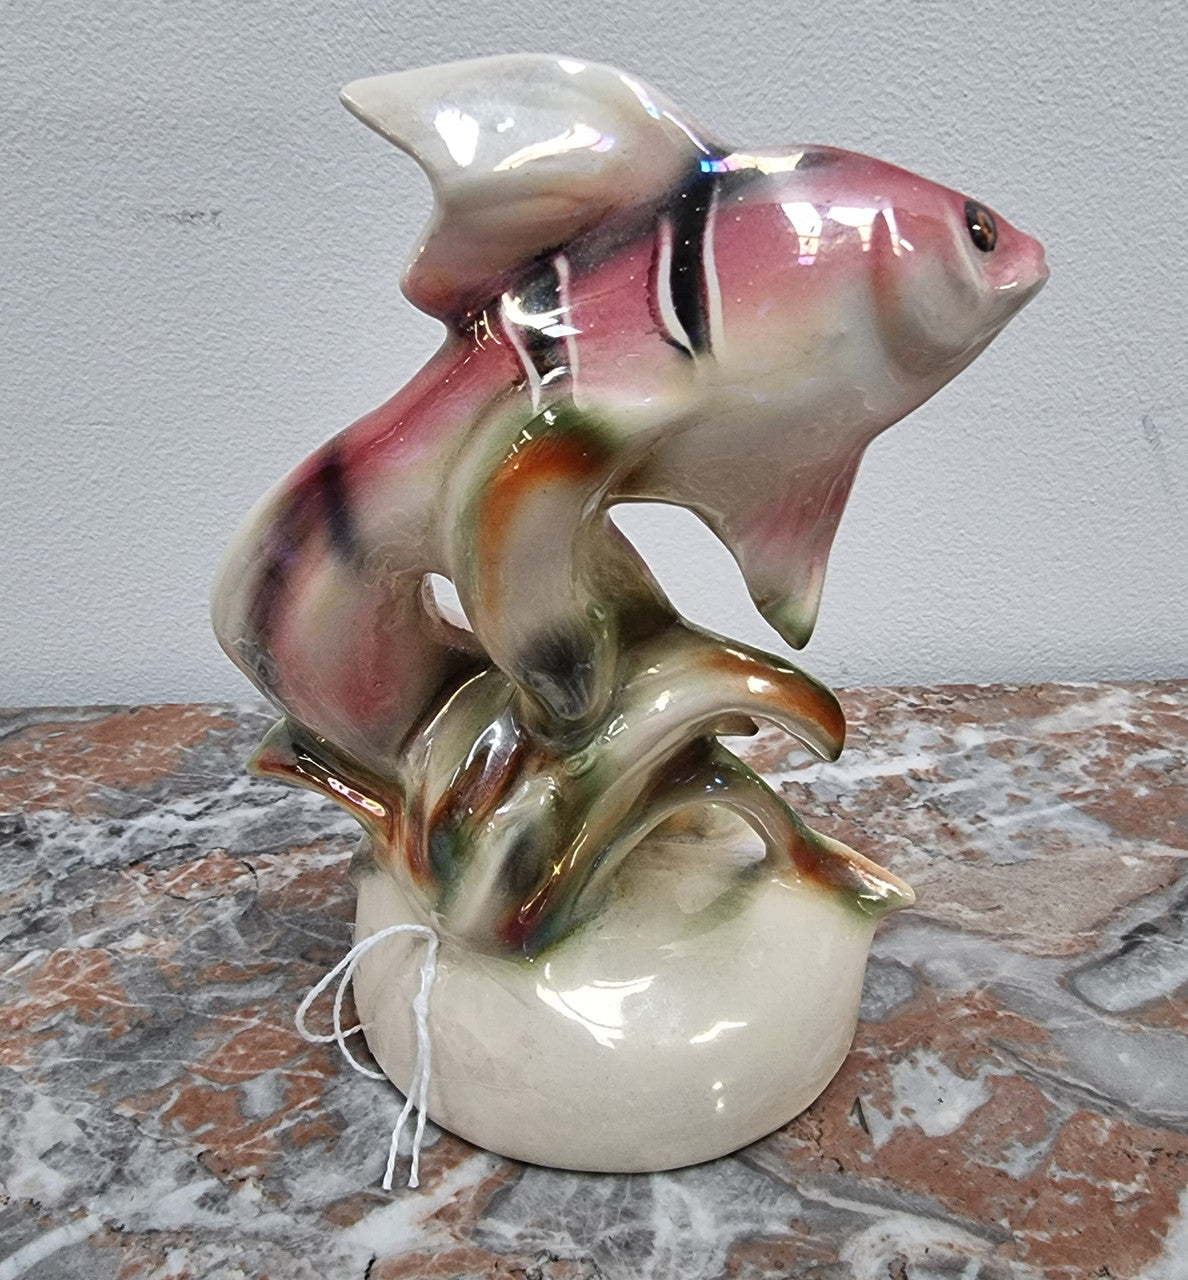 Vintage “Jema Holland” ceramic fish and snail statuette.